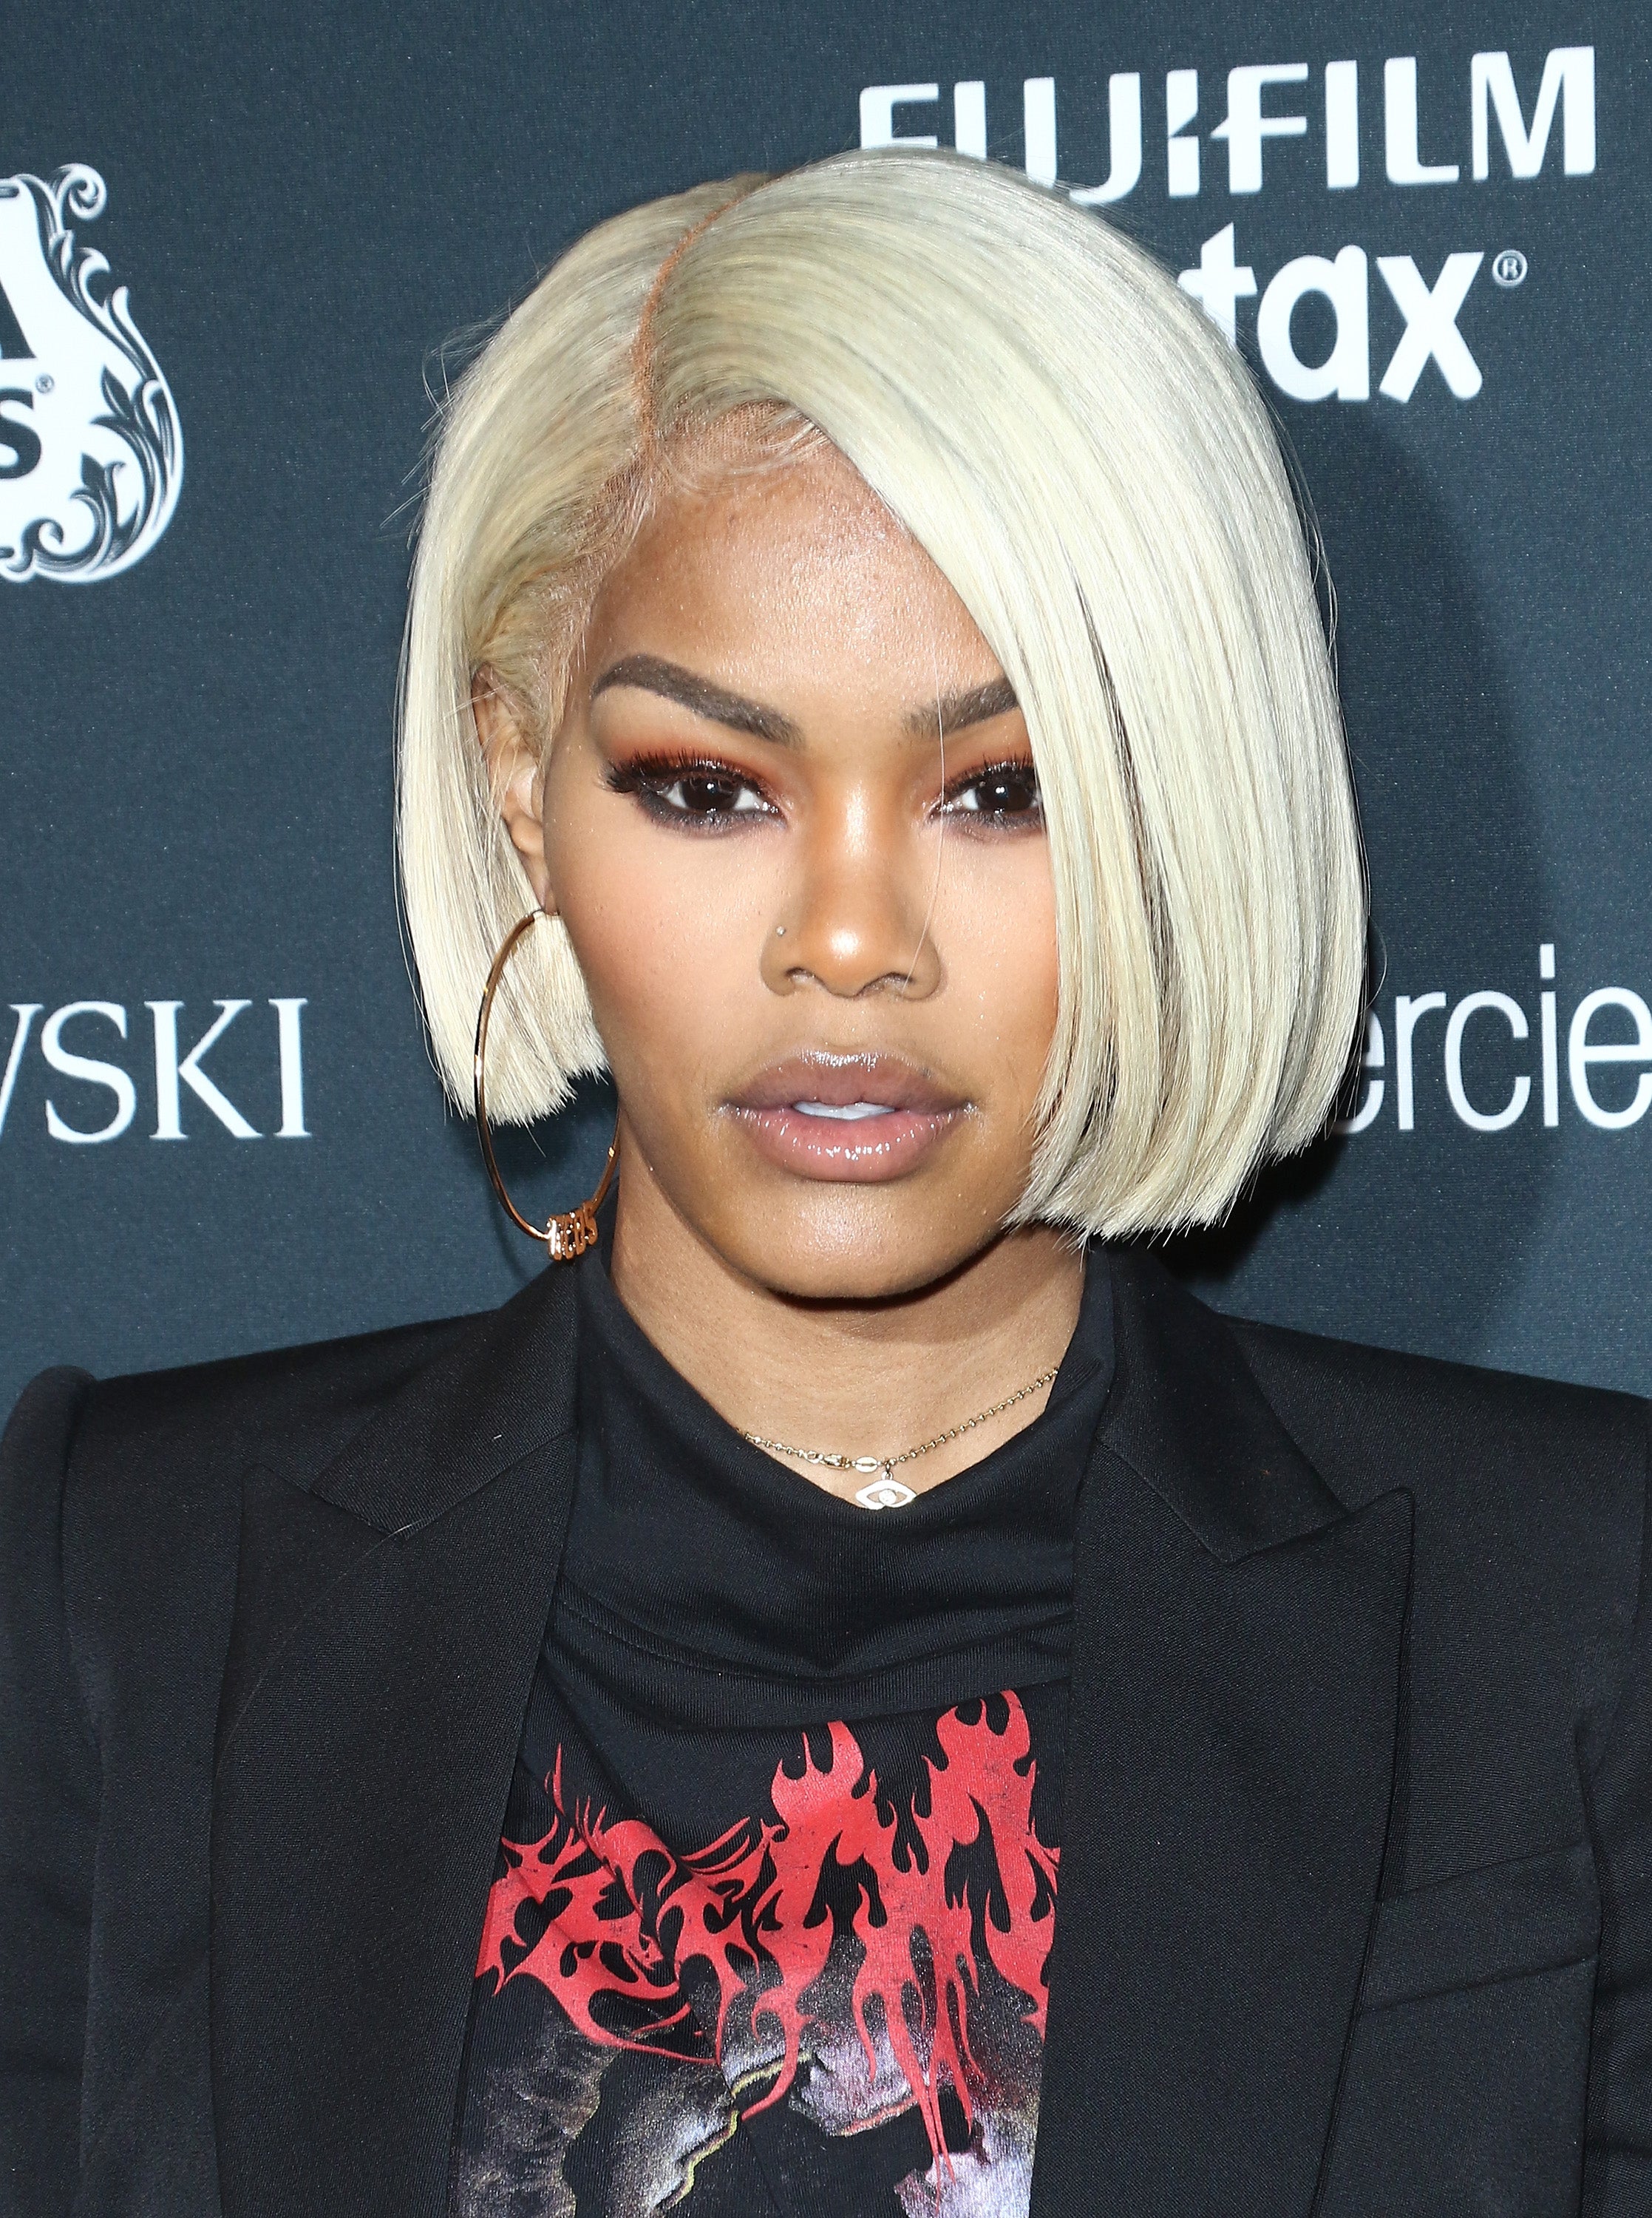 See How 17 Celebrities Rock Fall's Hottest Hair Color, Blonde
